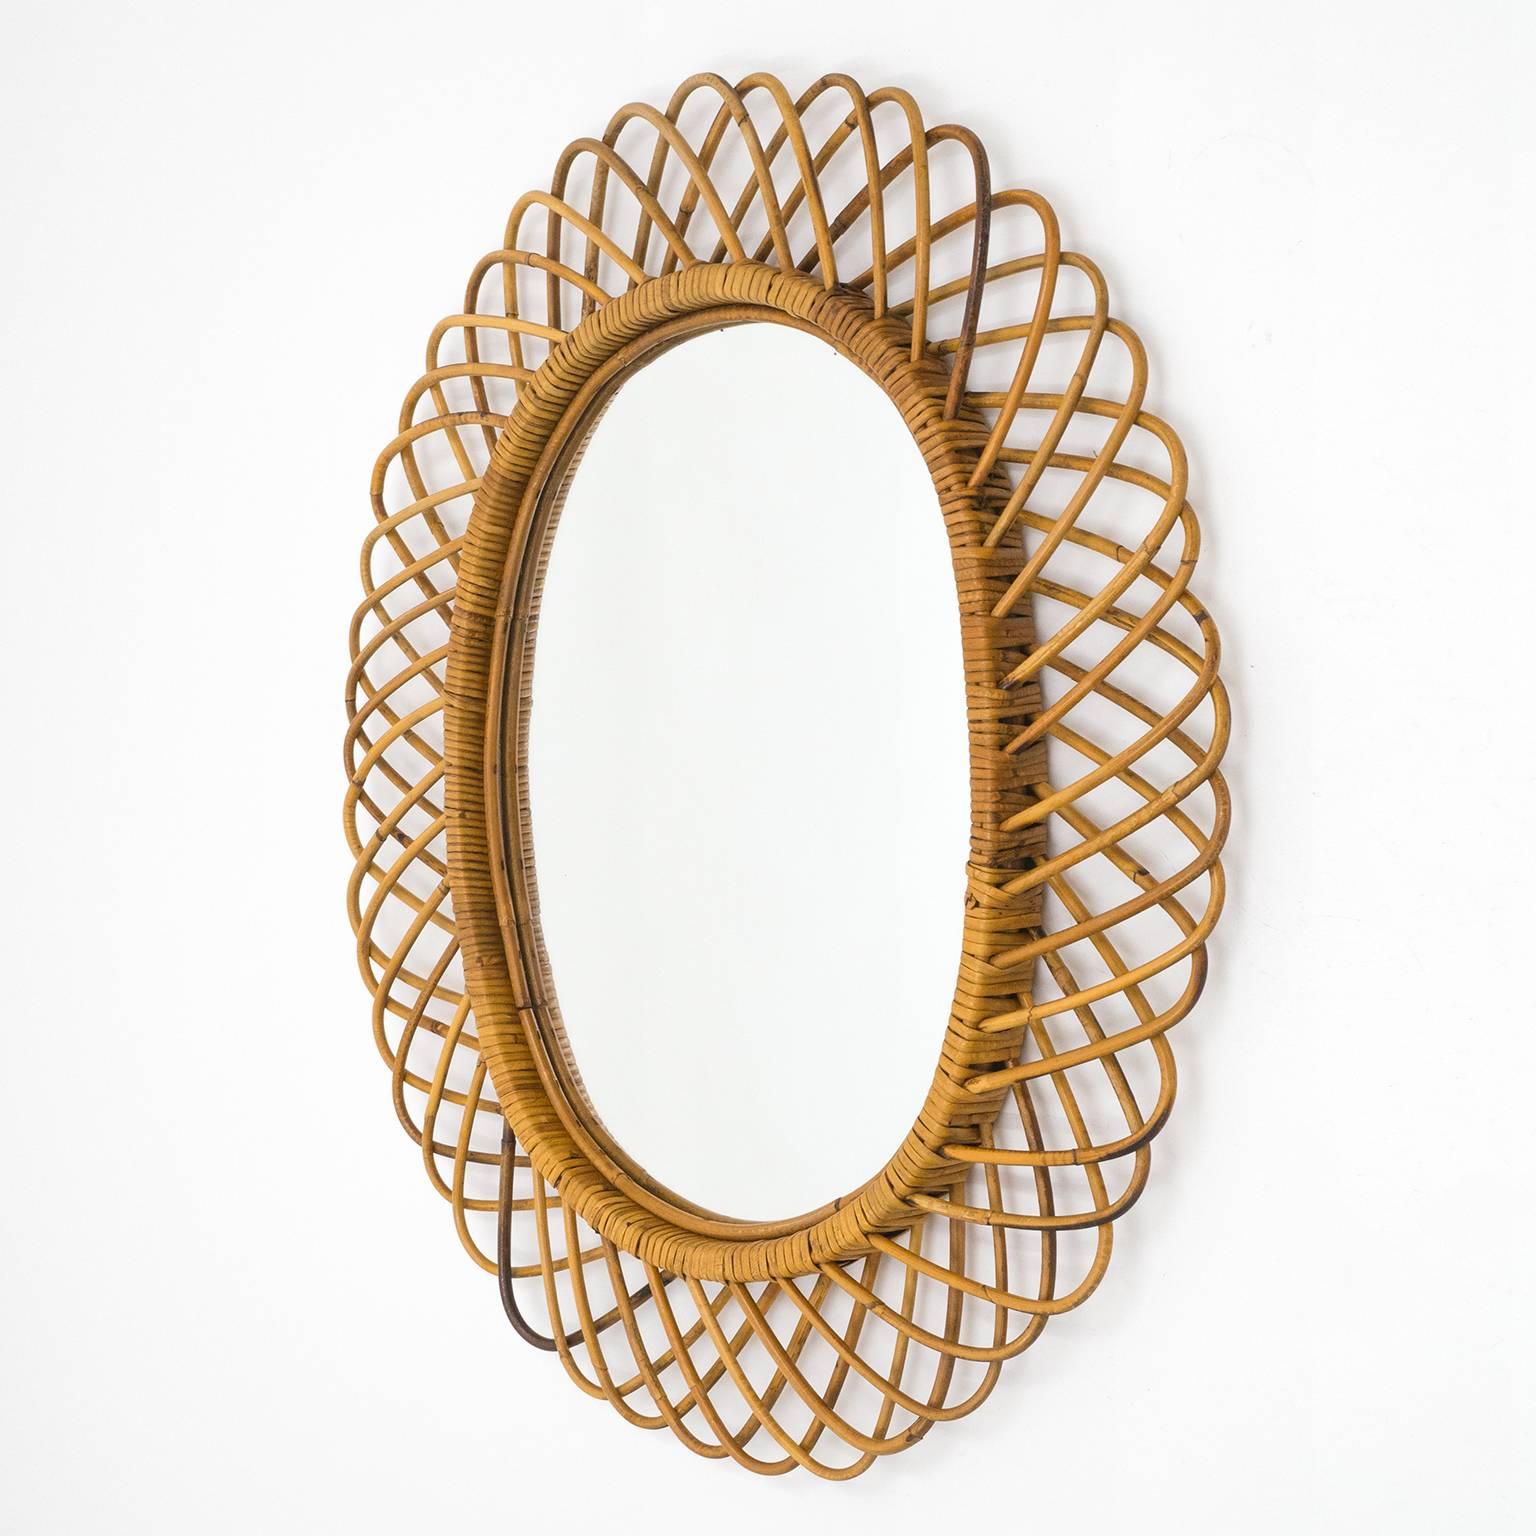 Lovely oval rattan mirror from the Italian Riviera in the 1960s. Very well preserved with all original parts, the rattan and wicker have a lovely warm patina and the original mirror exhibits a few age-related specks and light scratches.